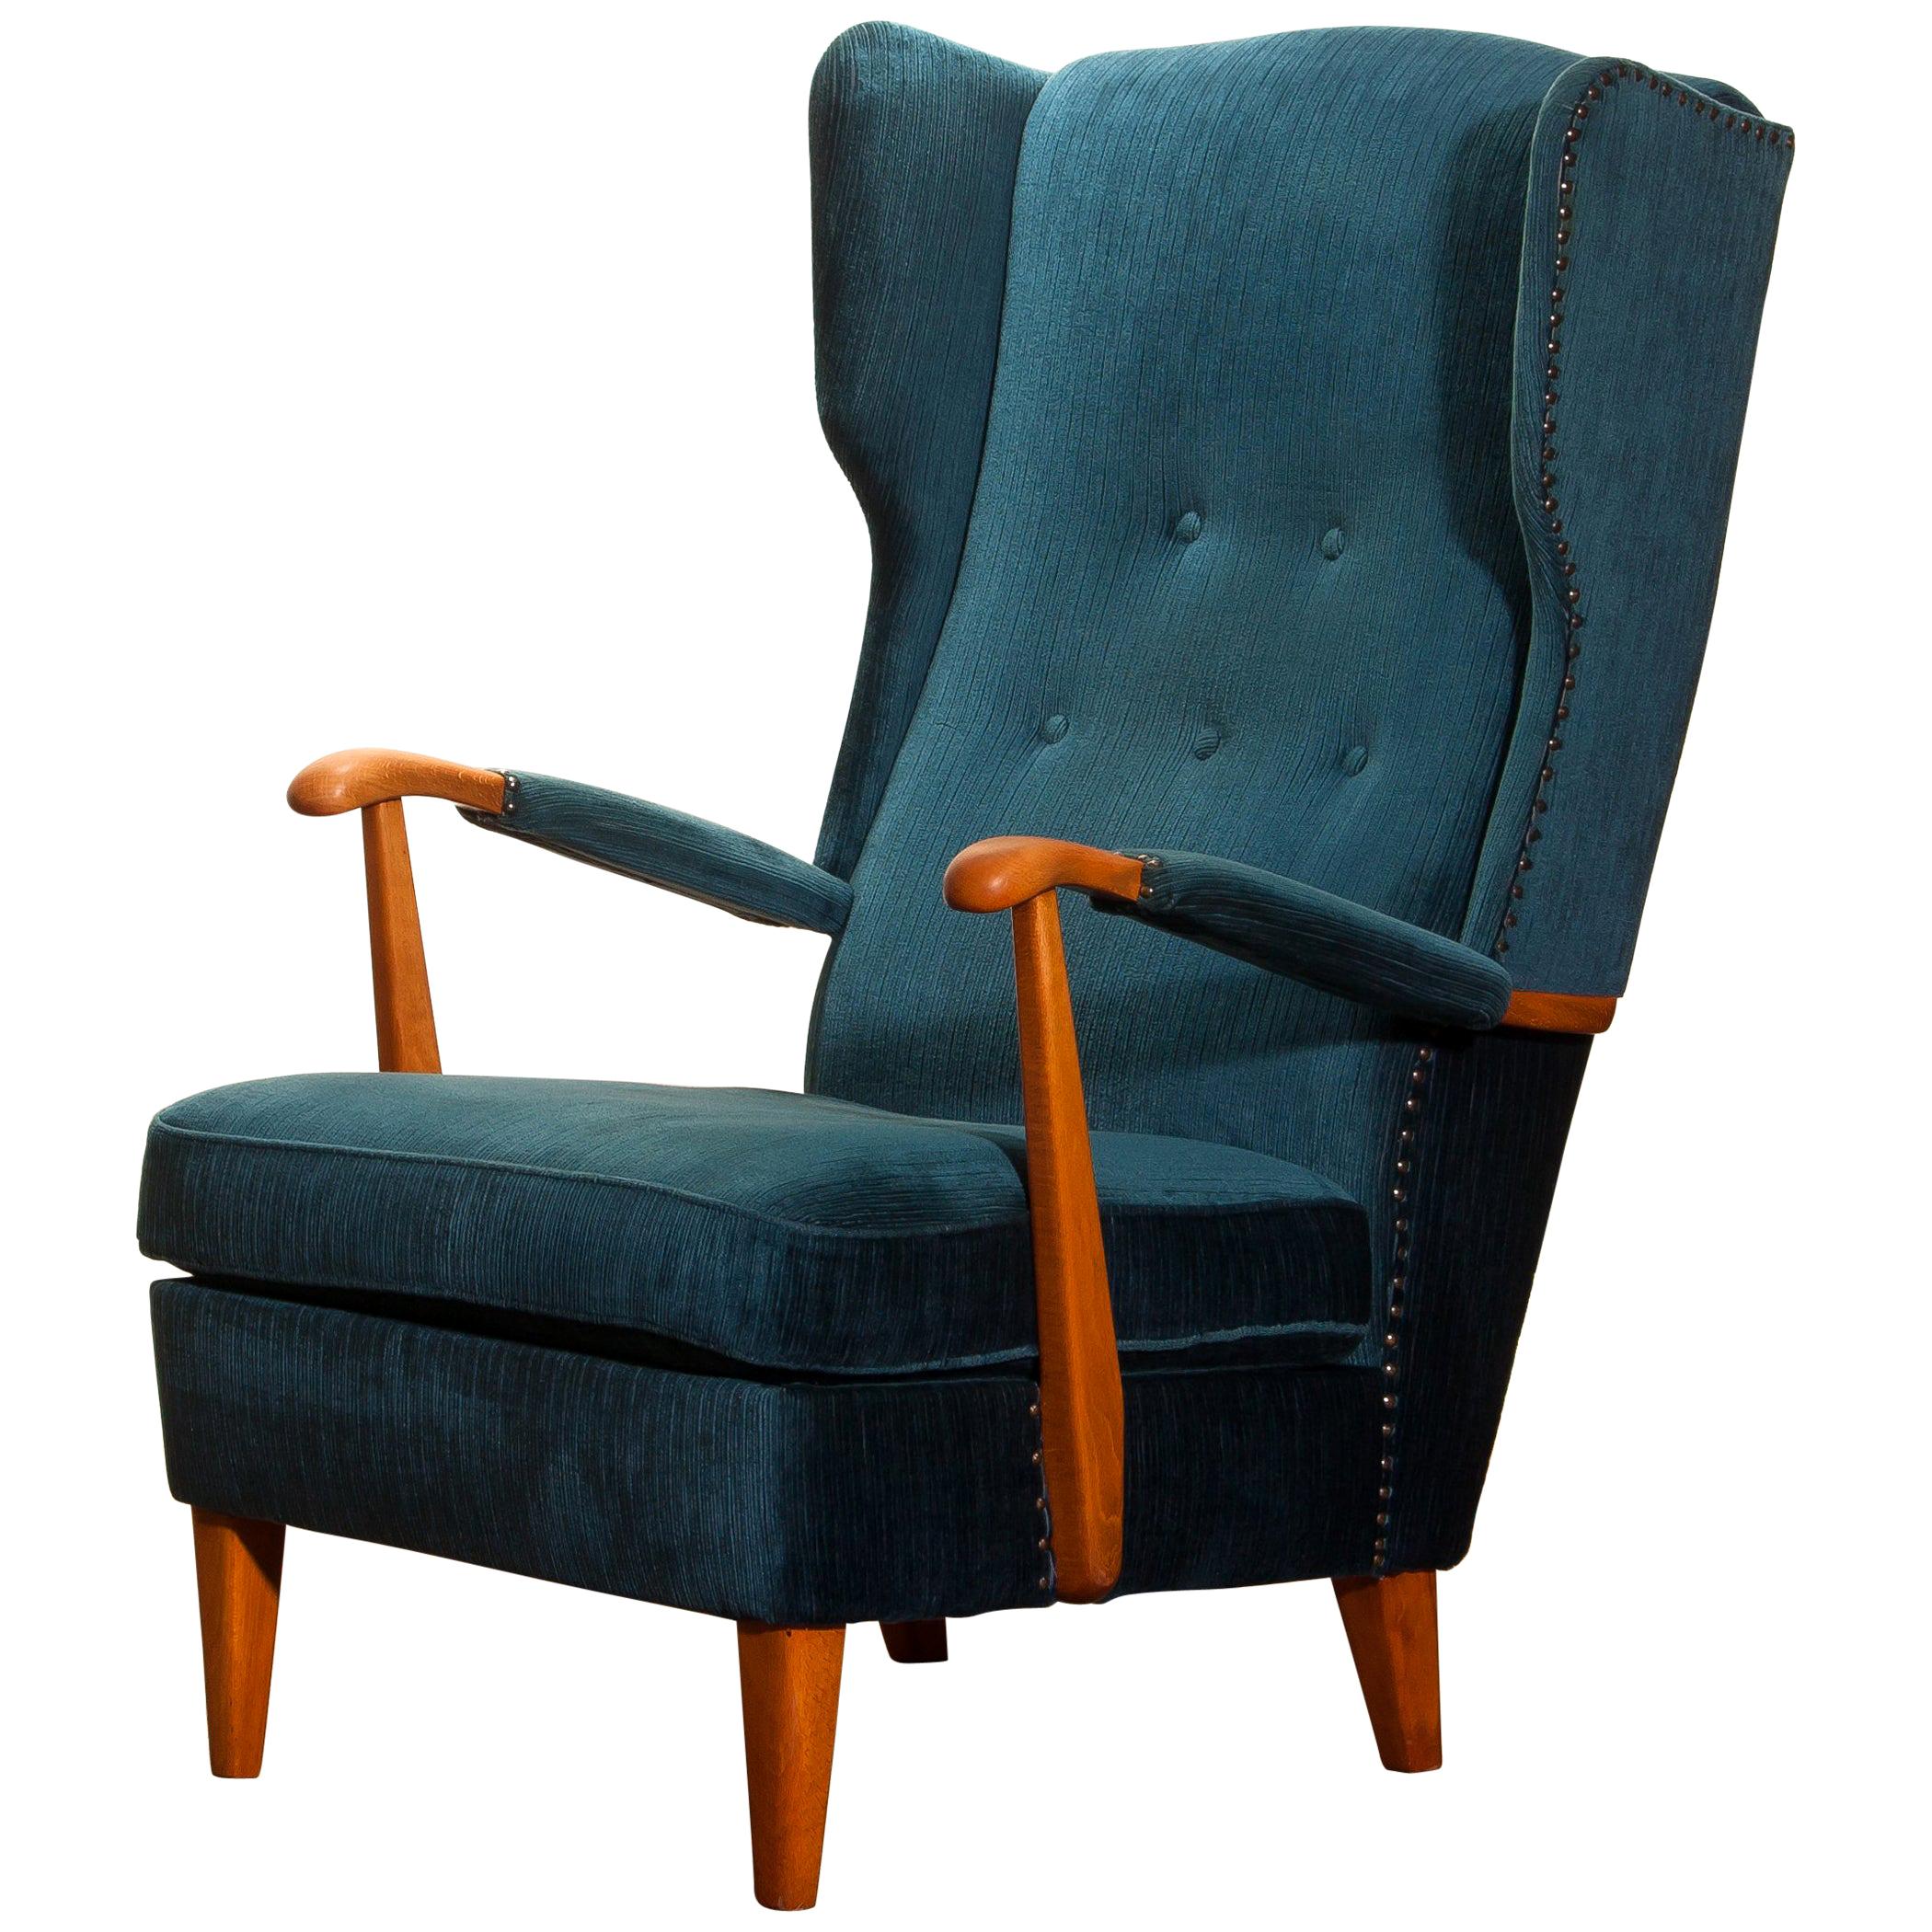 Extremely rare and beautiful wingback chair 